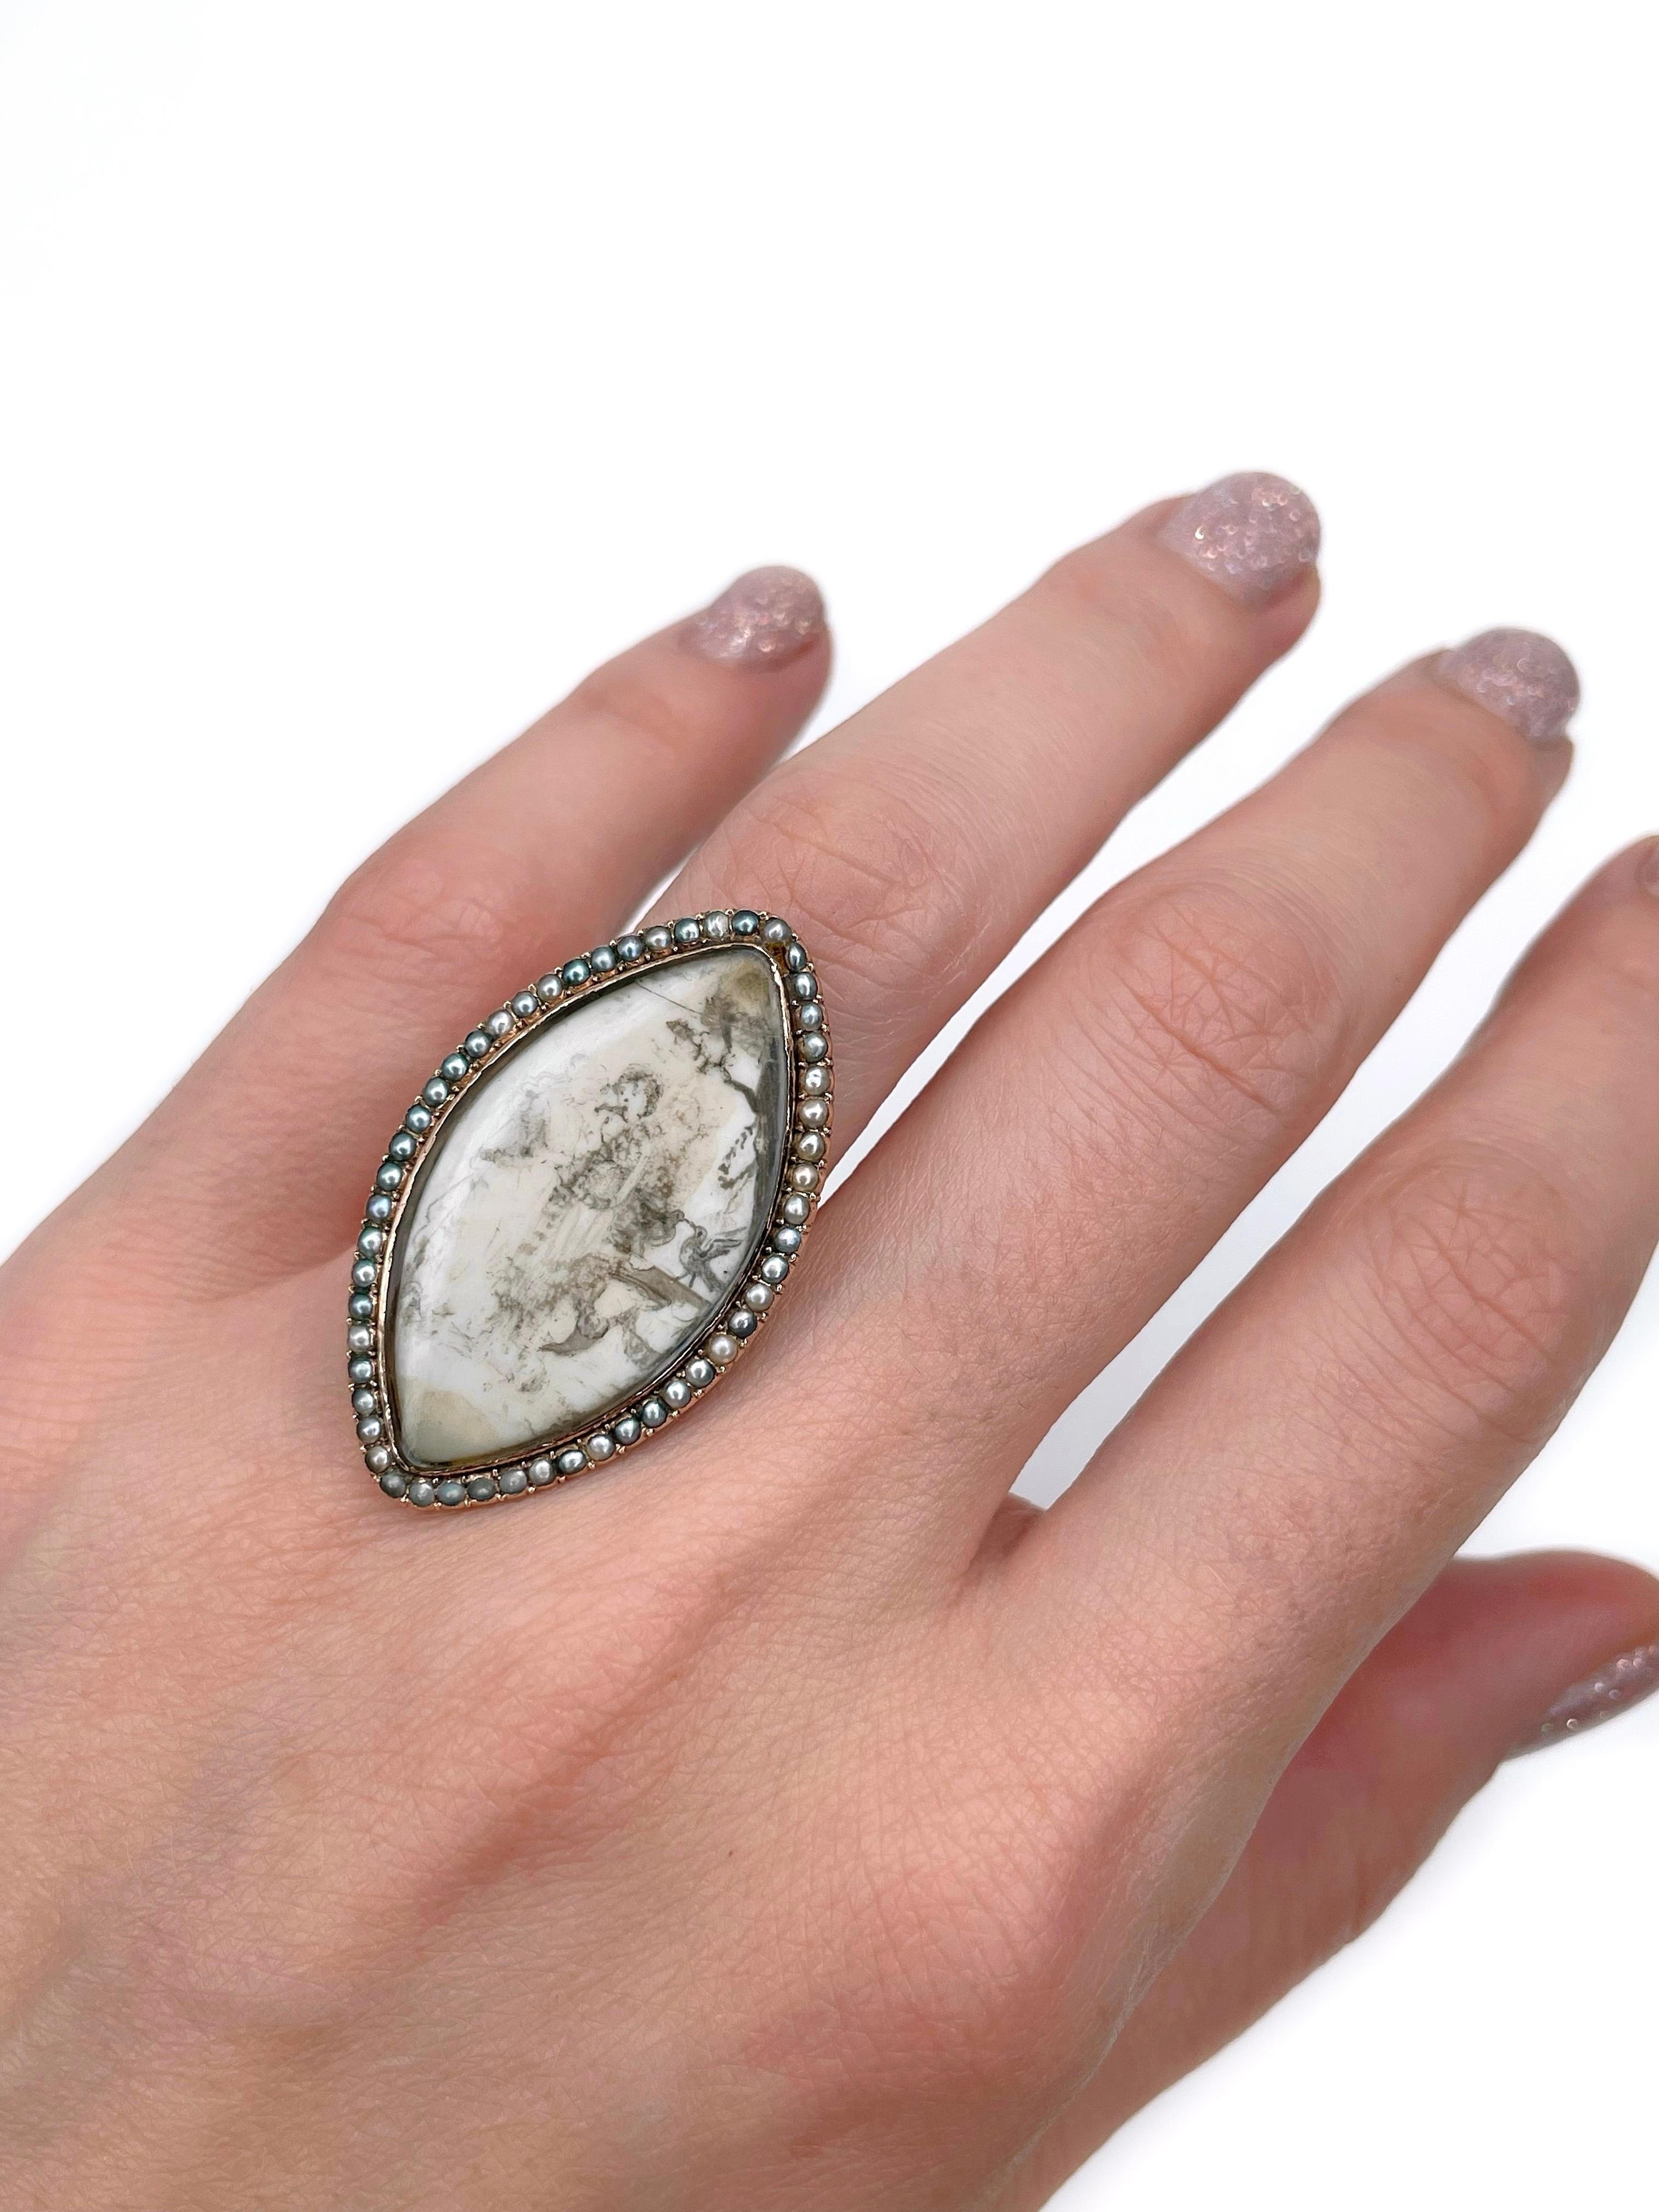 This is a Victorian navette ring crafted in 15K gold. Circa 1880.

It features a detailed miniature painting depicting two persons (possibly a couple) standing near two birds. The piece is adorned with seed pearls of different shades.

There is an